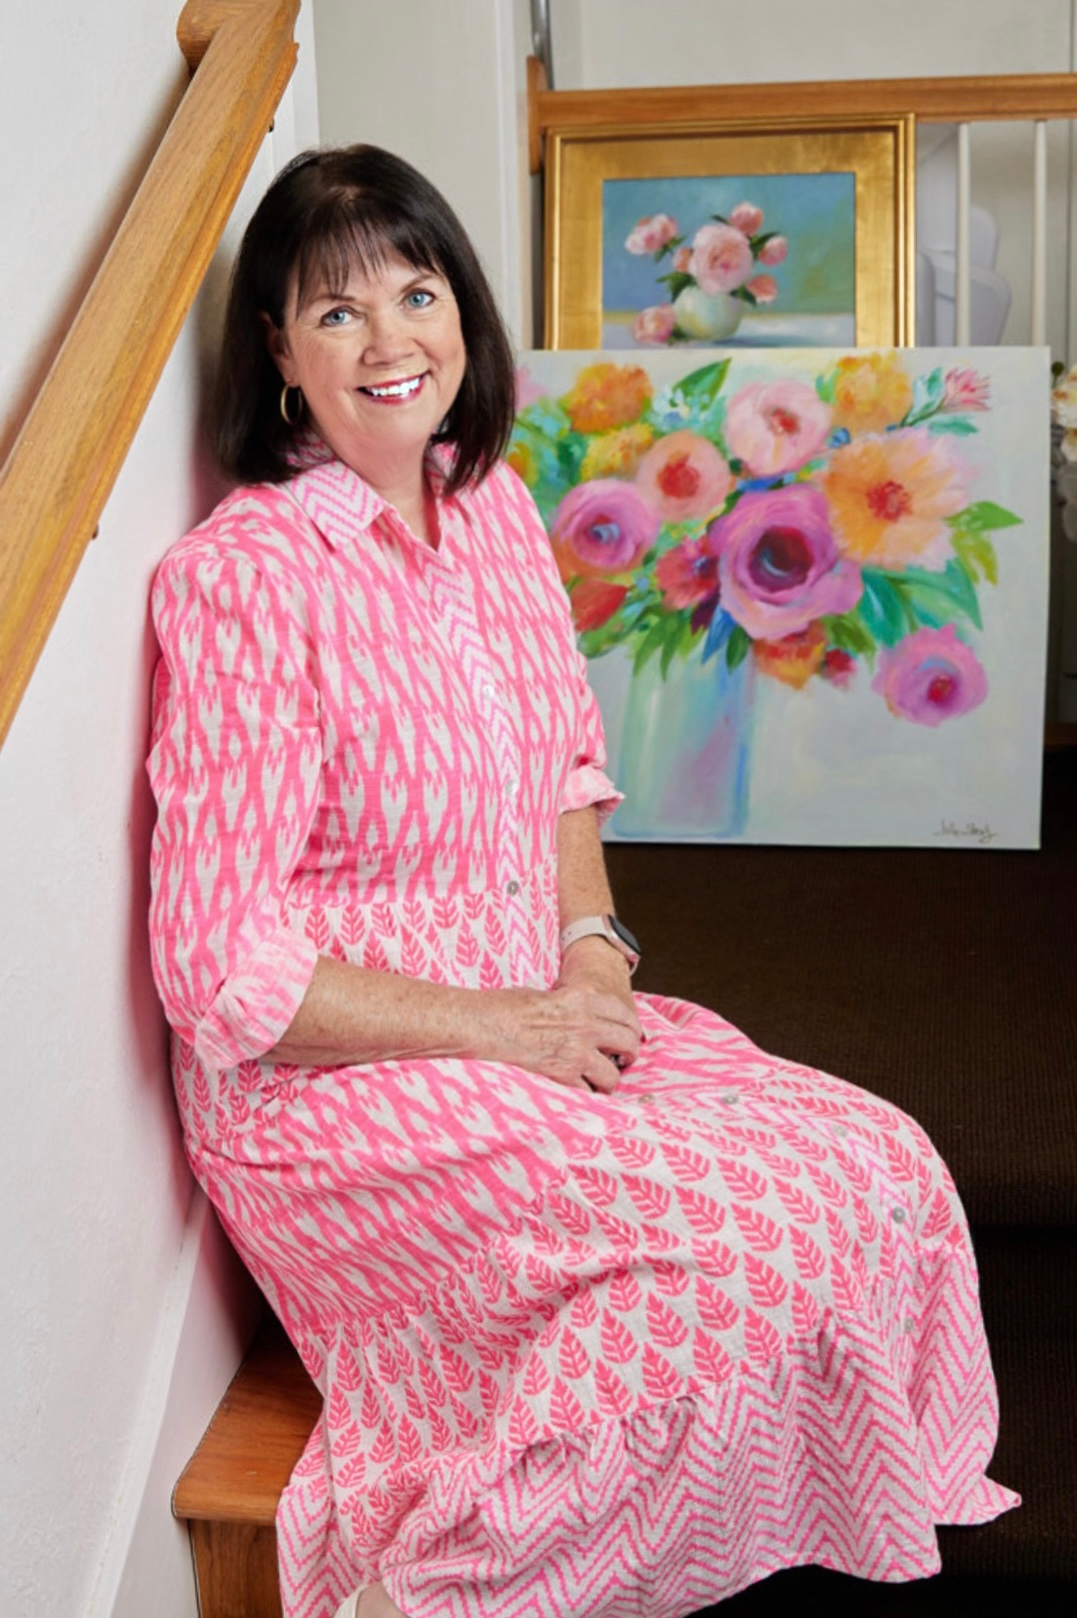 Julie Shealy in Pink Patterned Shirt Dress with Artwork Behind Her